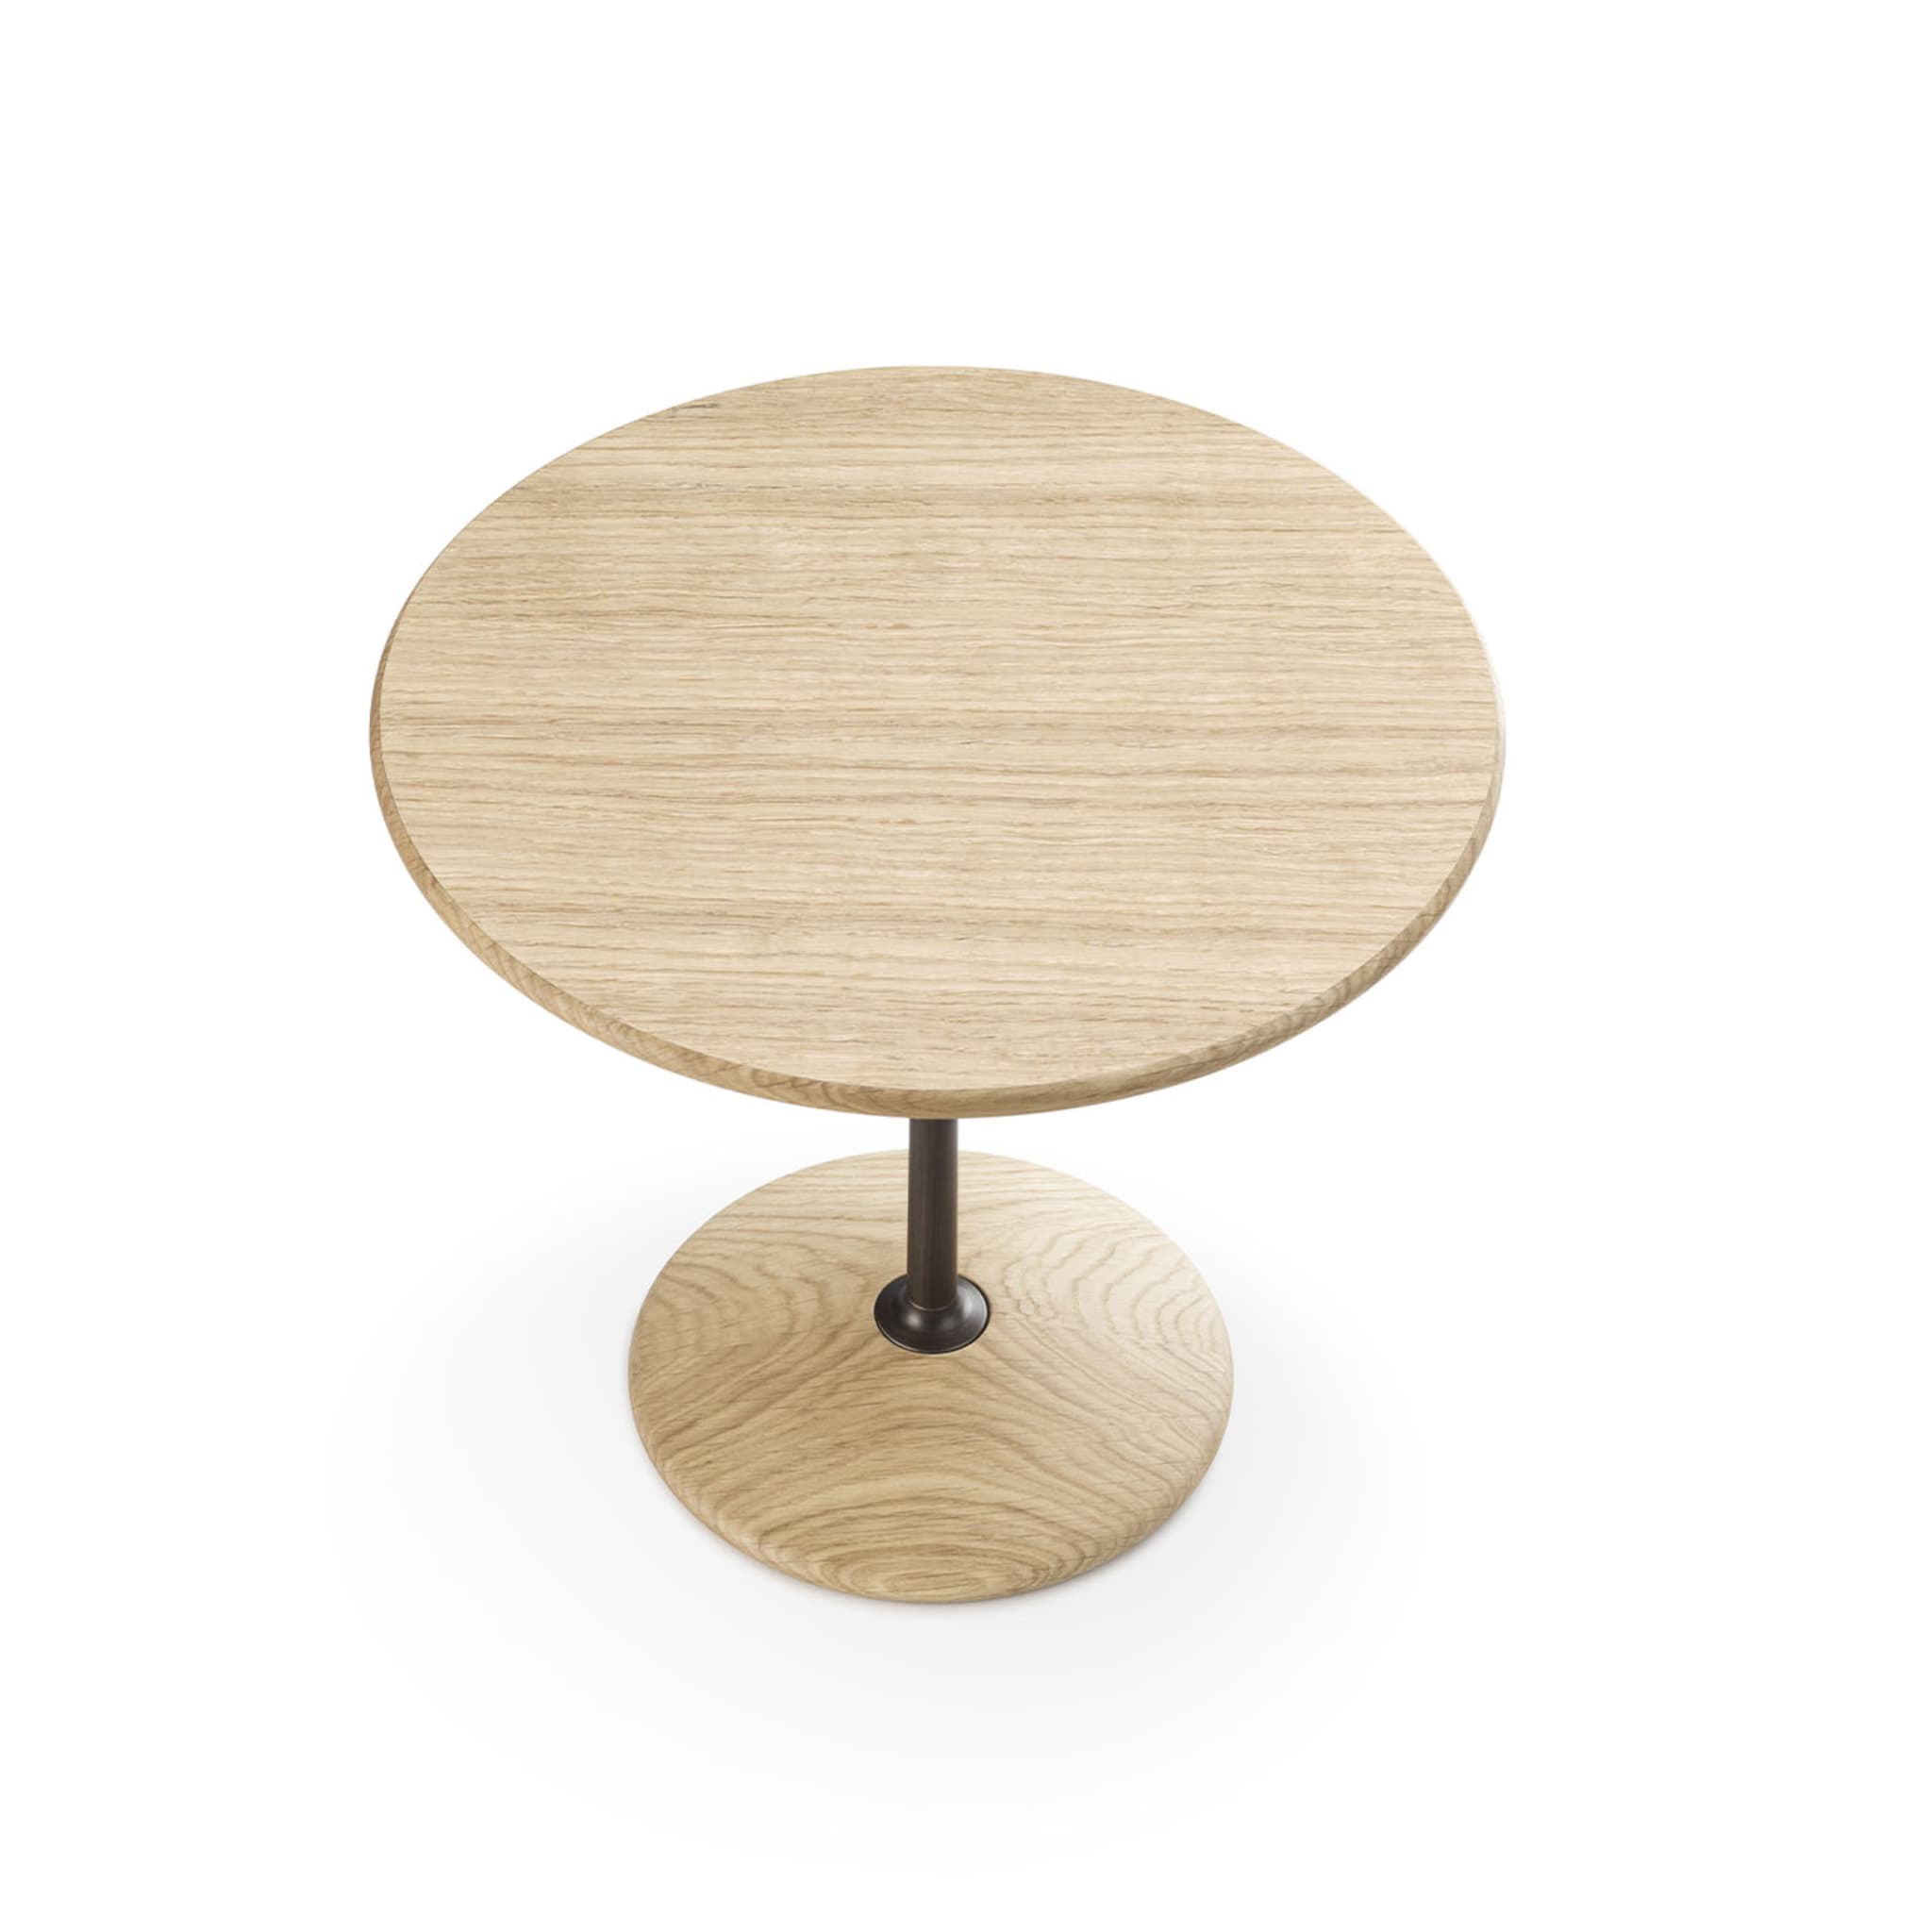 Arnold Small Side Table by Paolo Rizzato - Alternative view 1